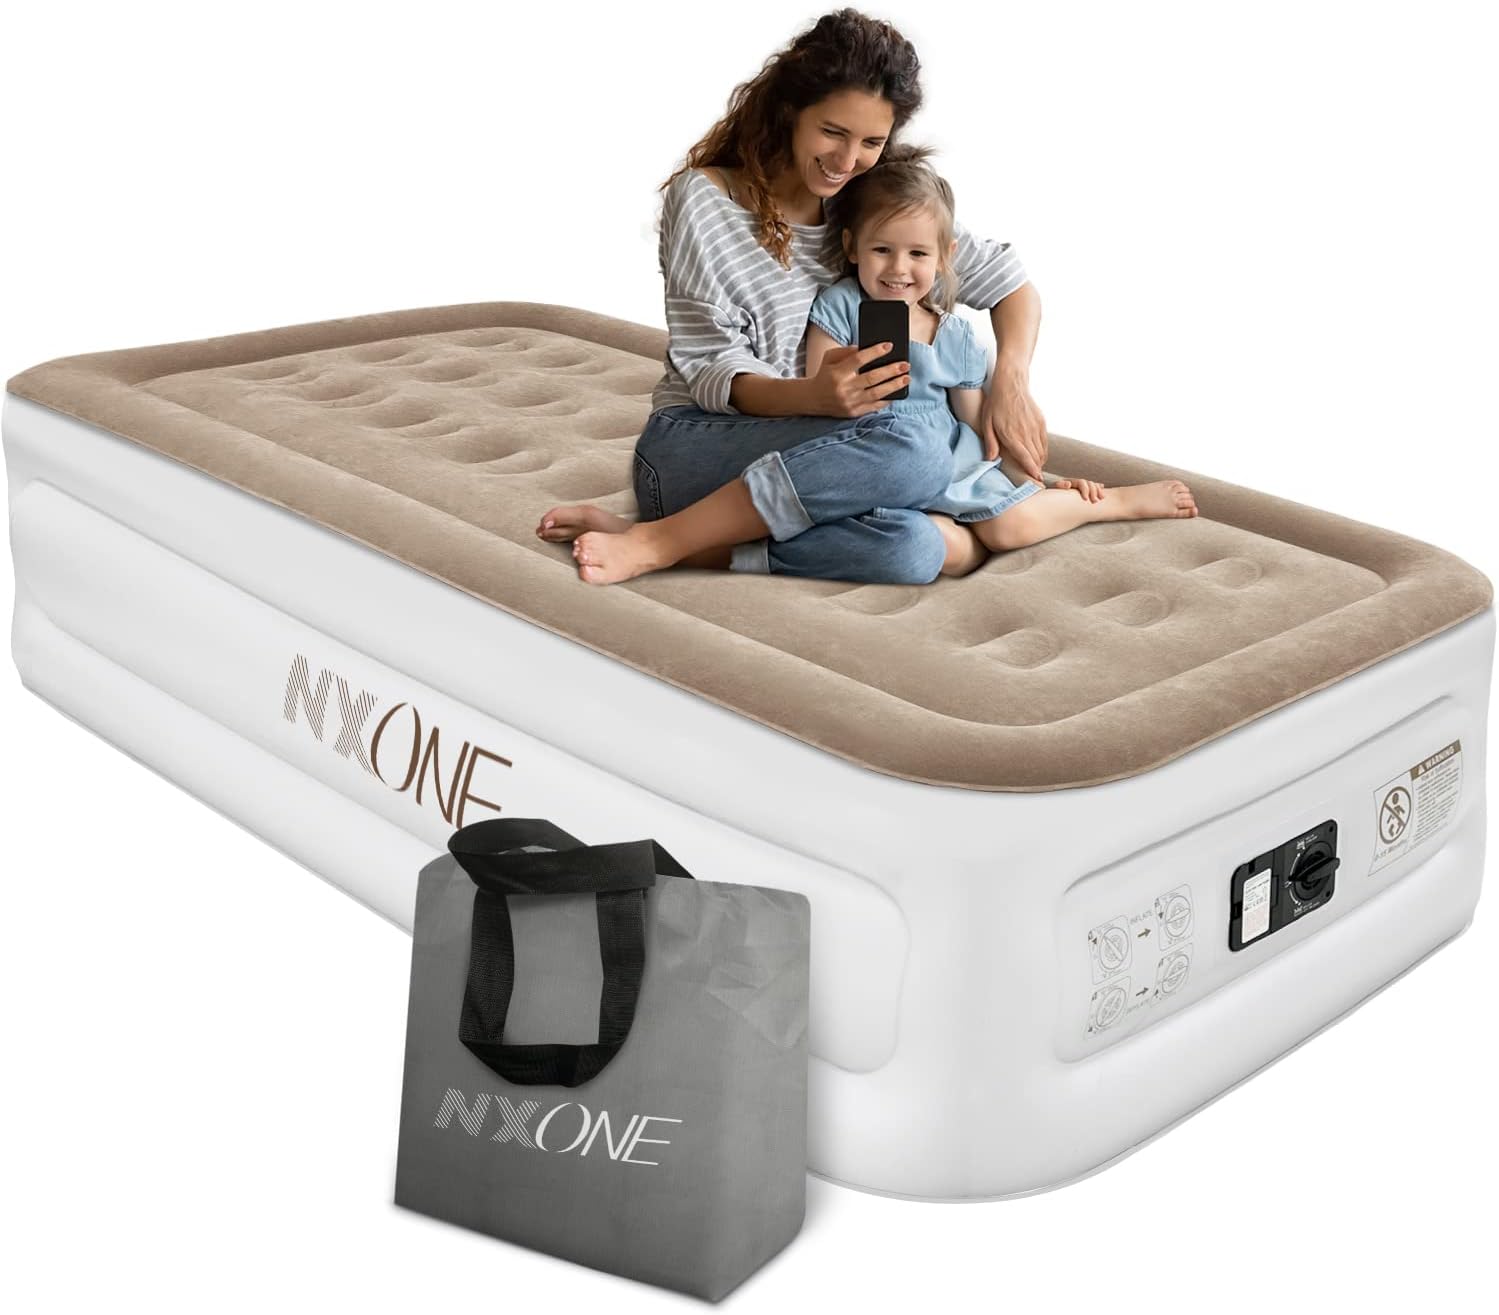 NXONE Air Mattress,Inflatable Single Airbed Luxury [...]